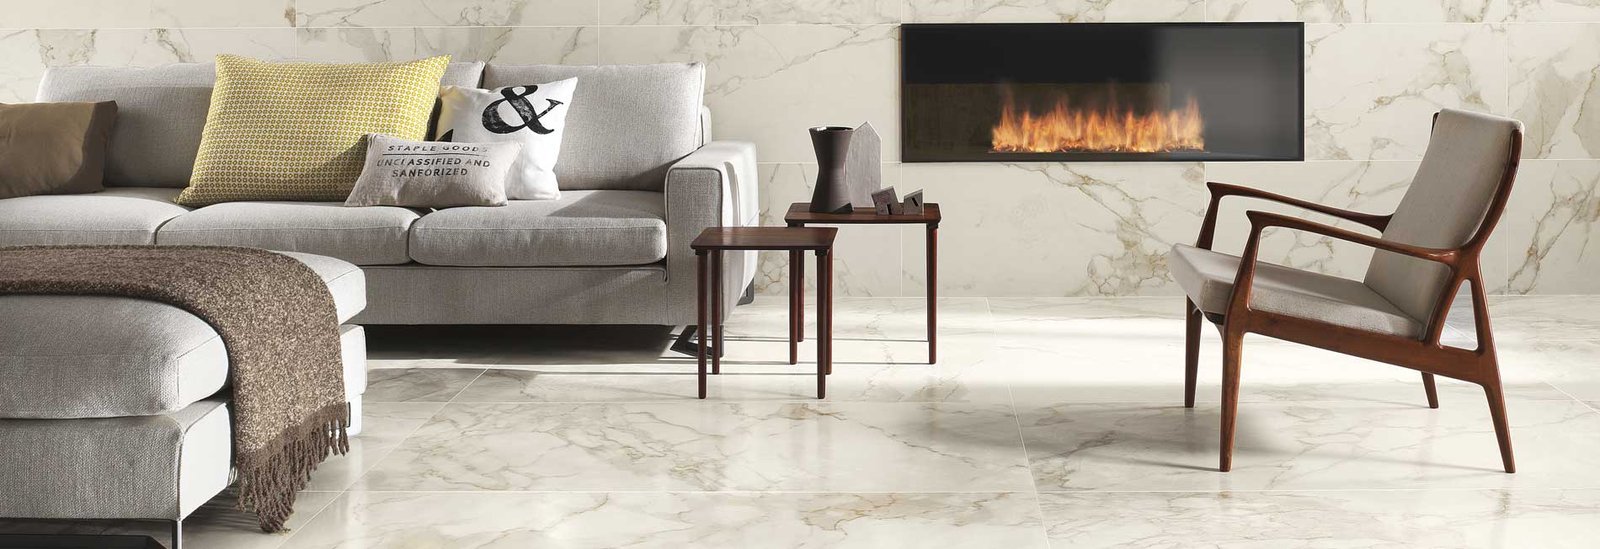 Indian Vs Italian Marble- Which One Suits Better To Your Home Interior